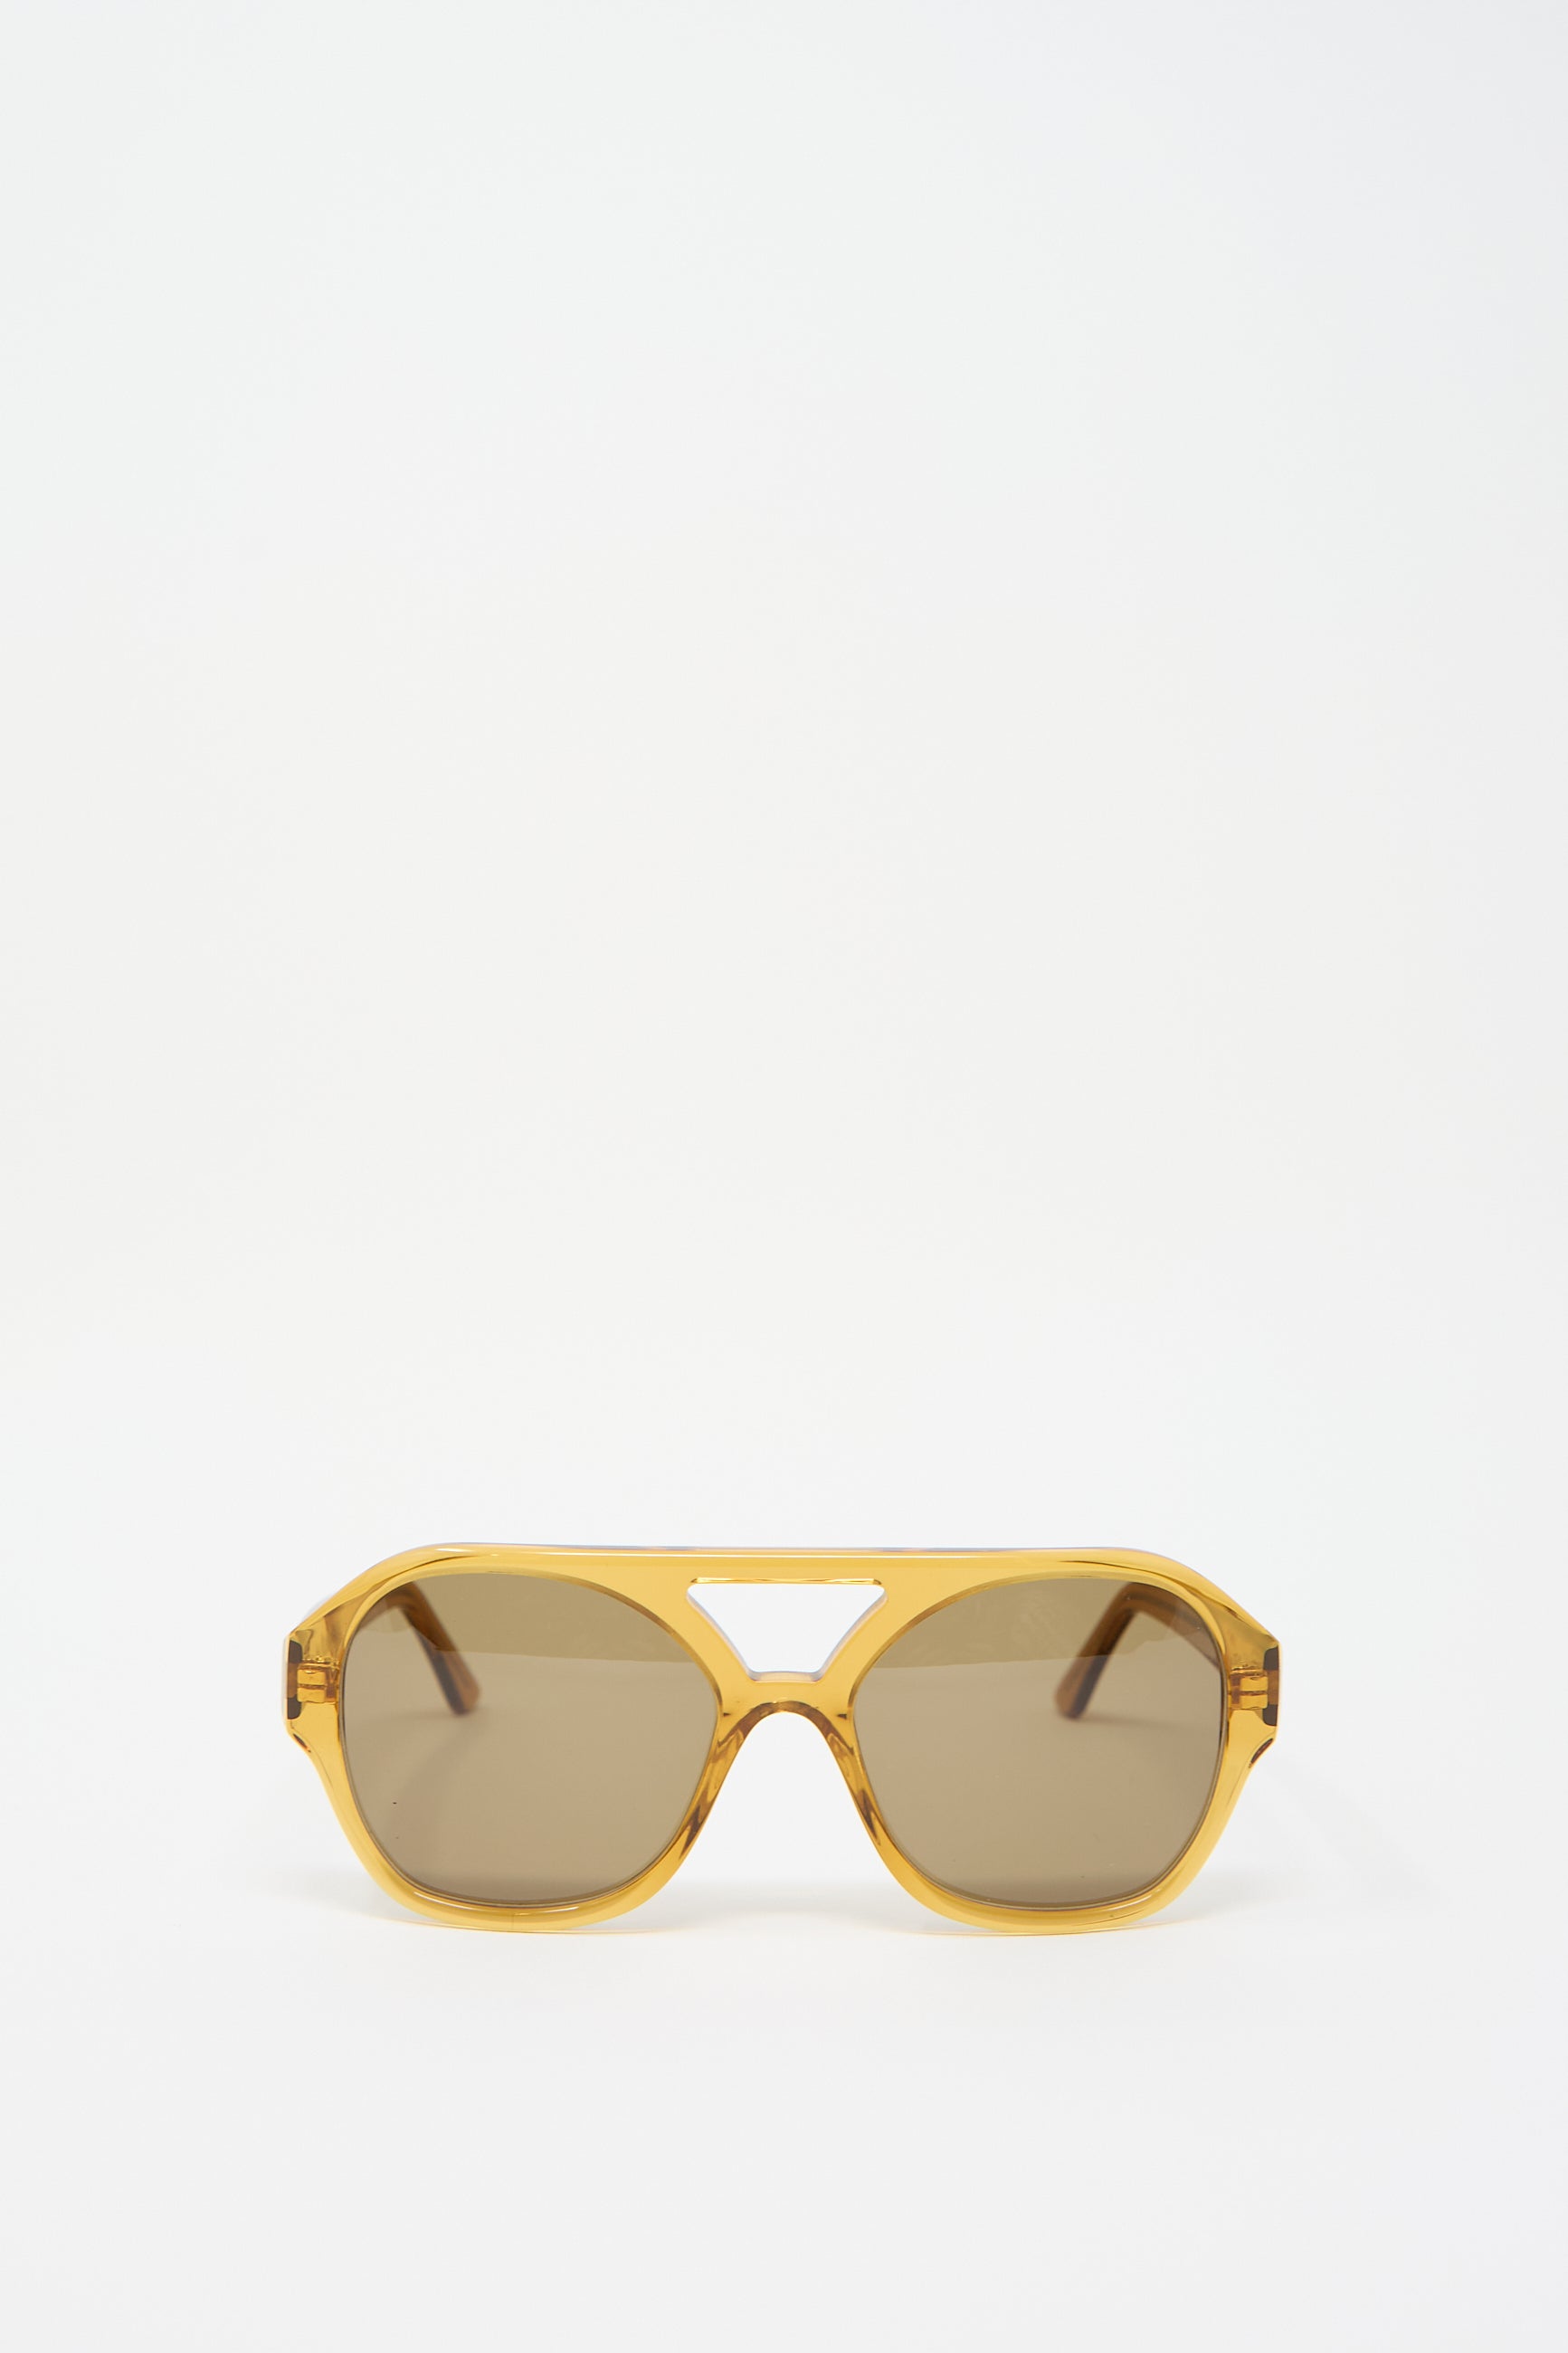 A pair of Chiyo Aviator Sunglasses in Honey by Eva Masaki, crafted from Italian acetate, displayed against a plain white background.